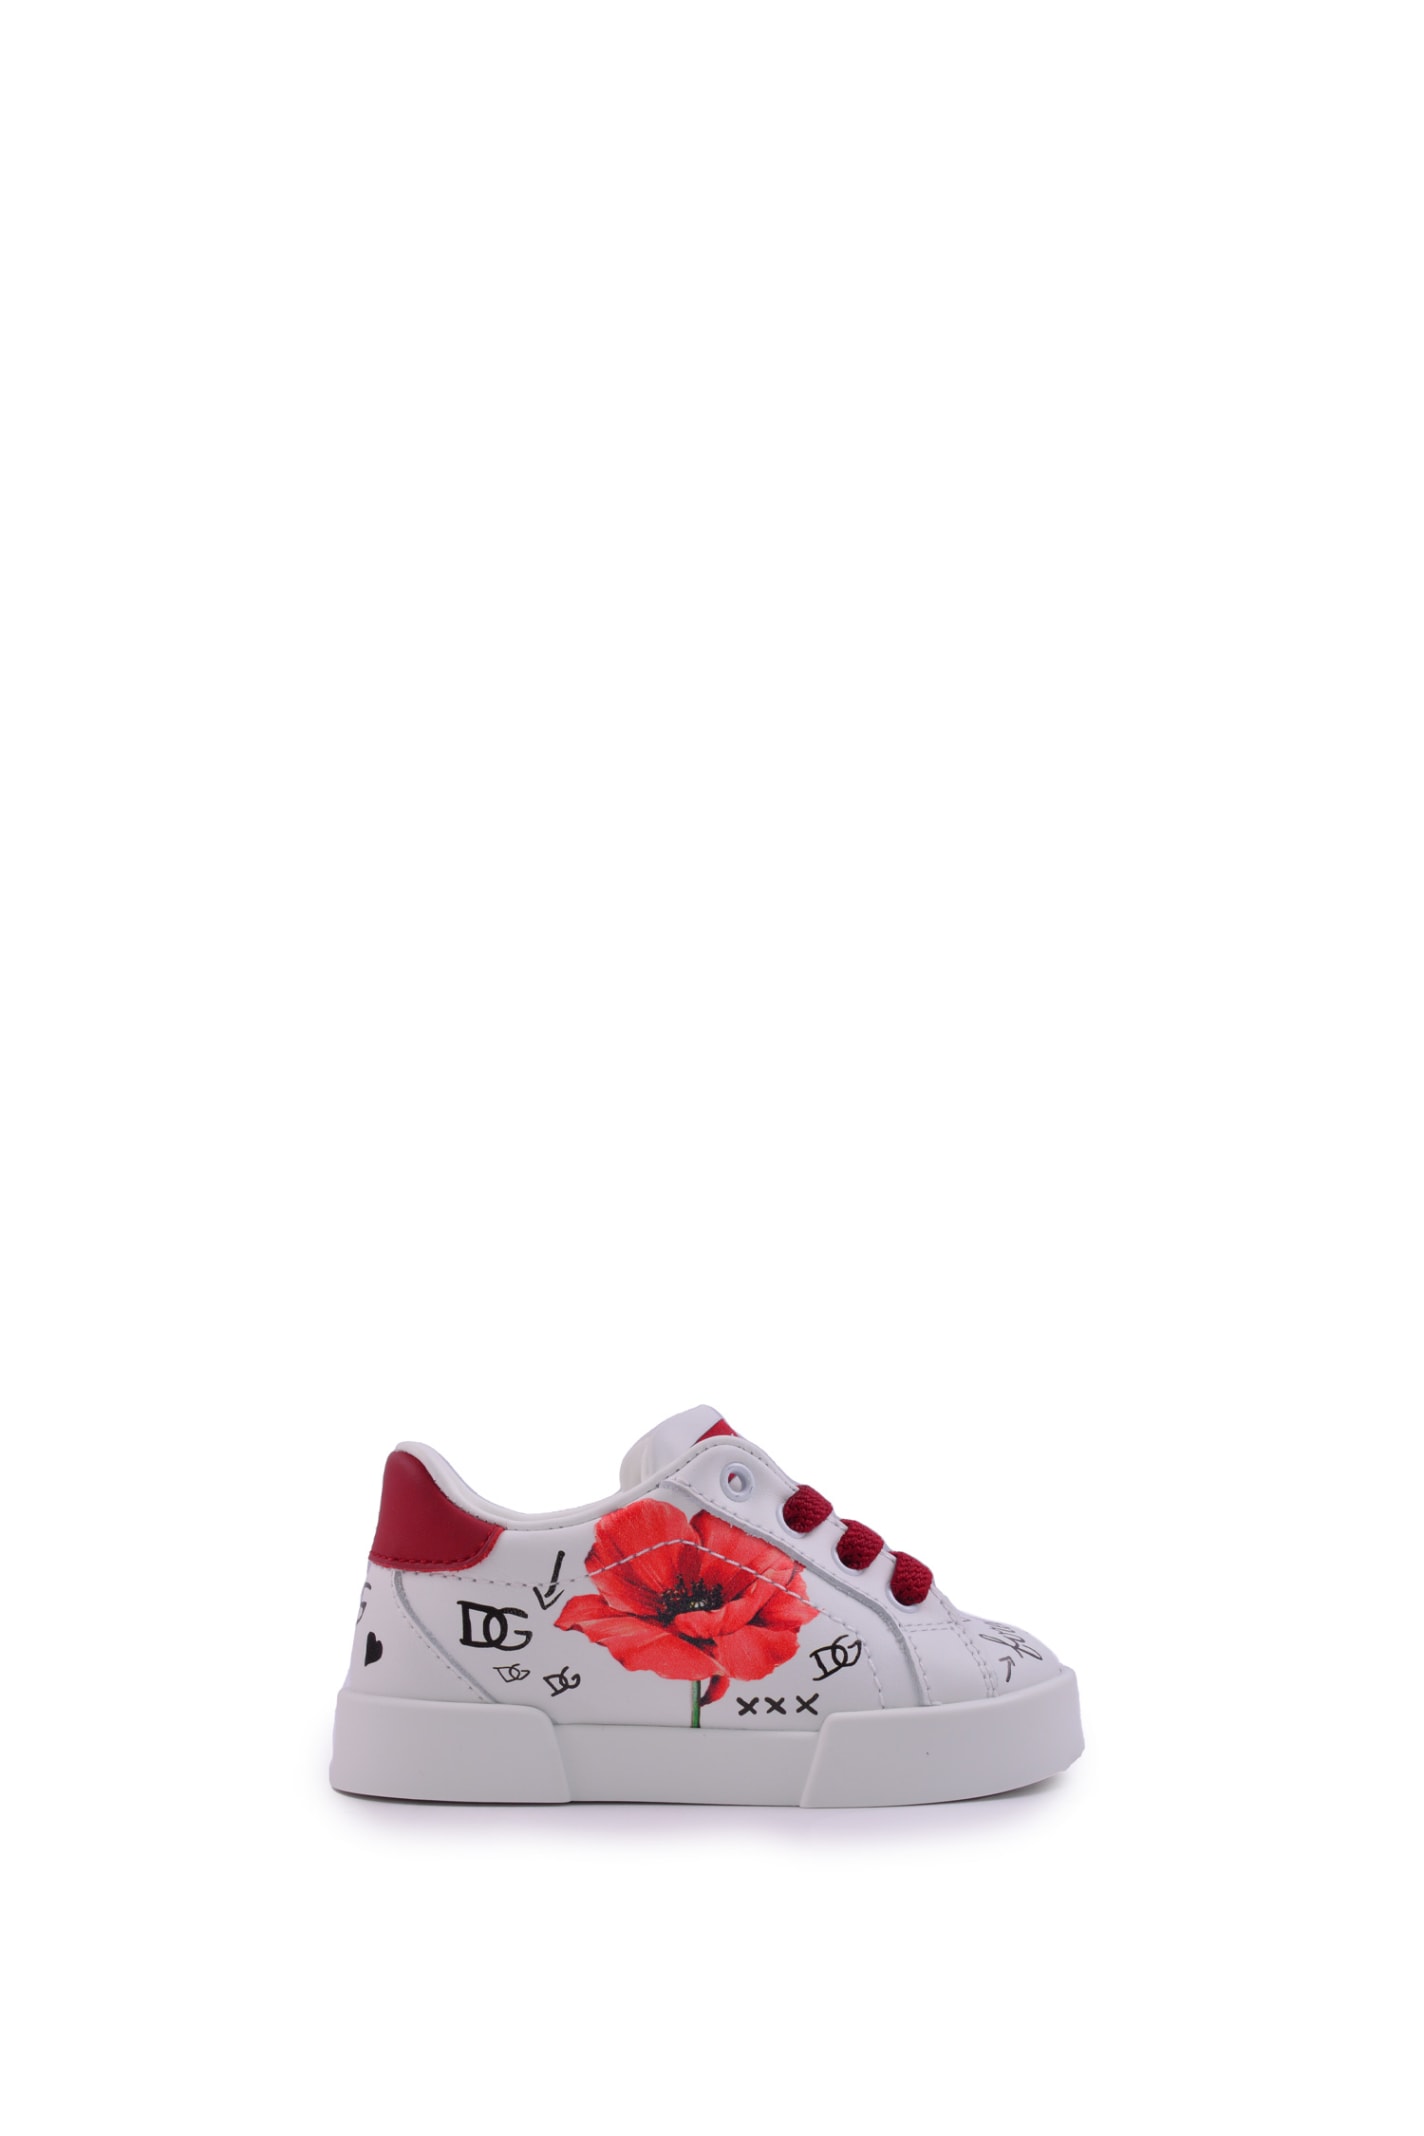 Dolce & Gabbana Sneakers With Poppy Print